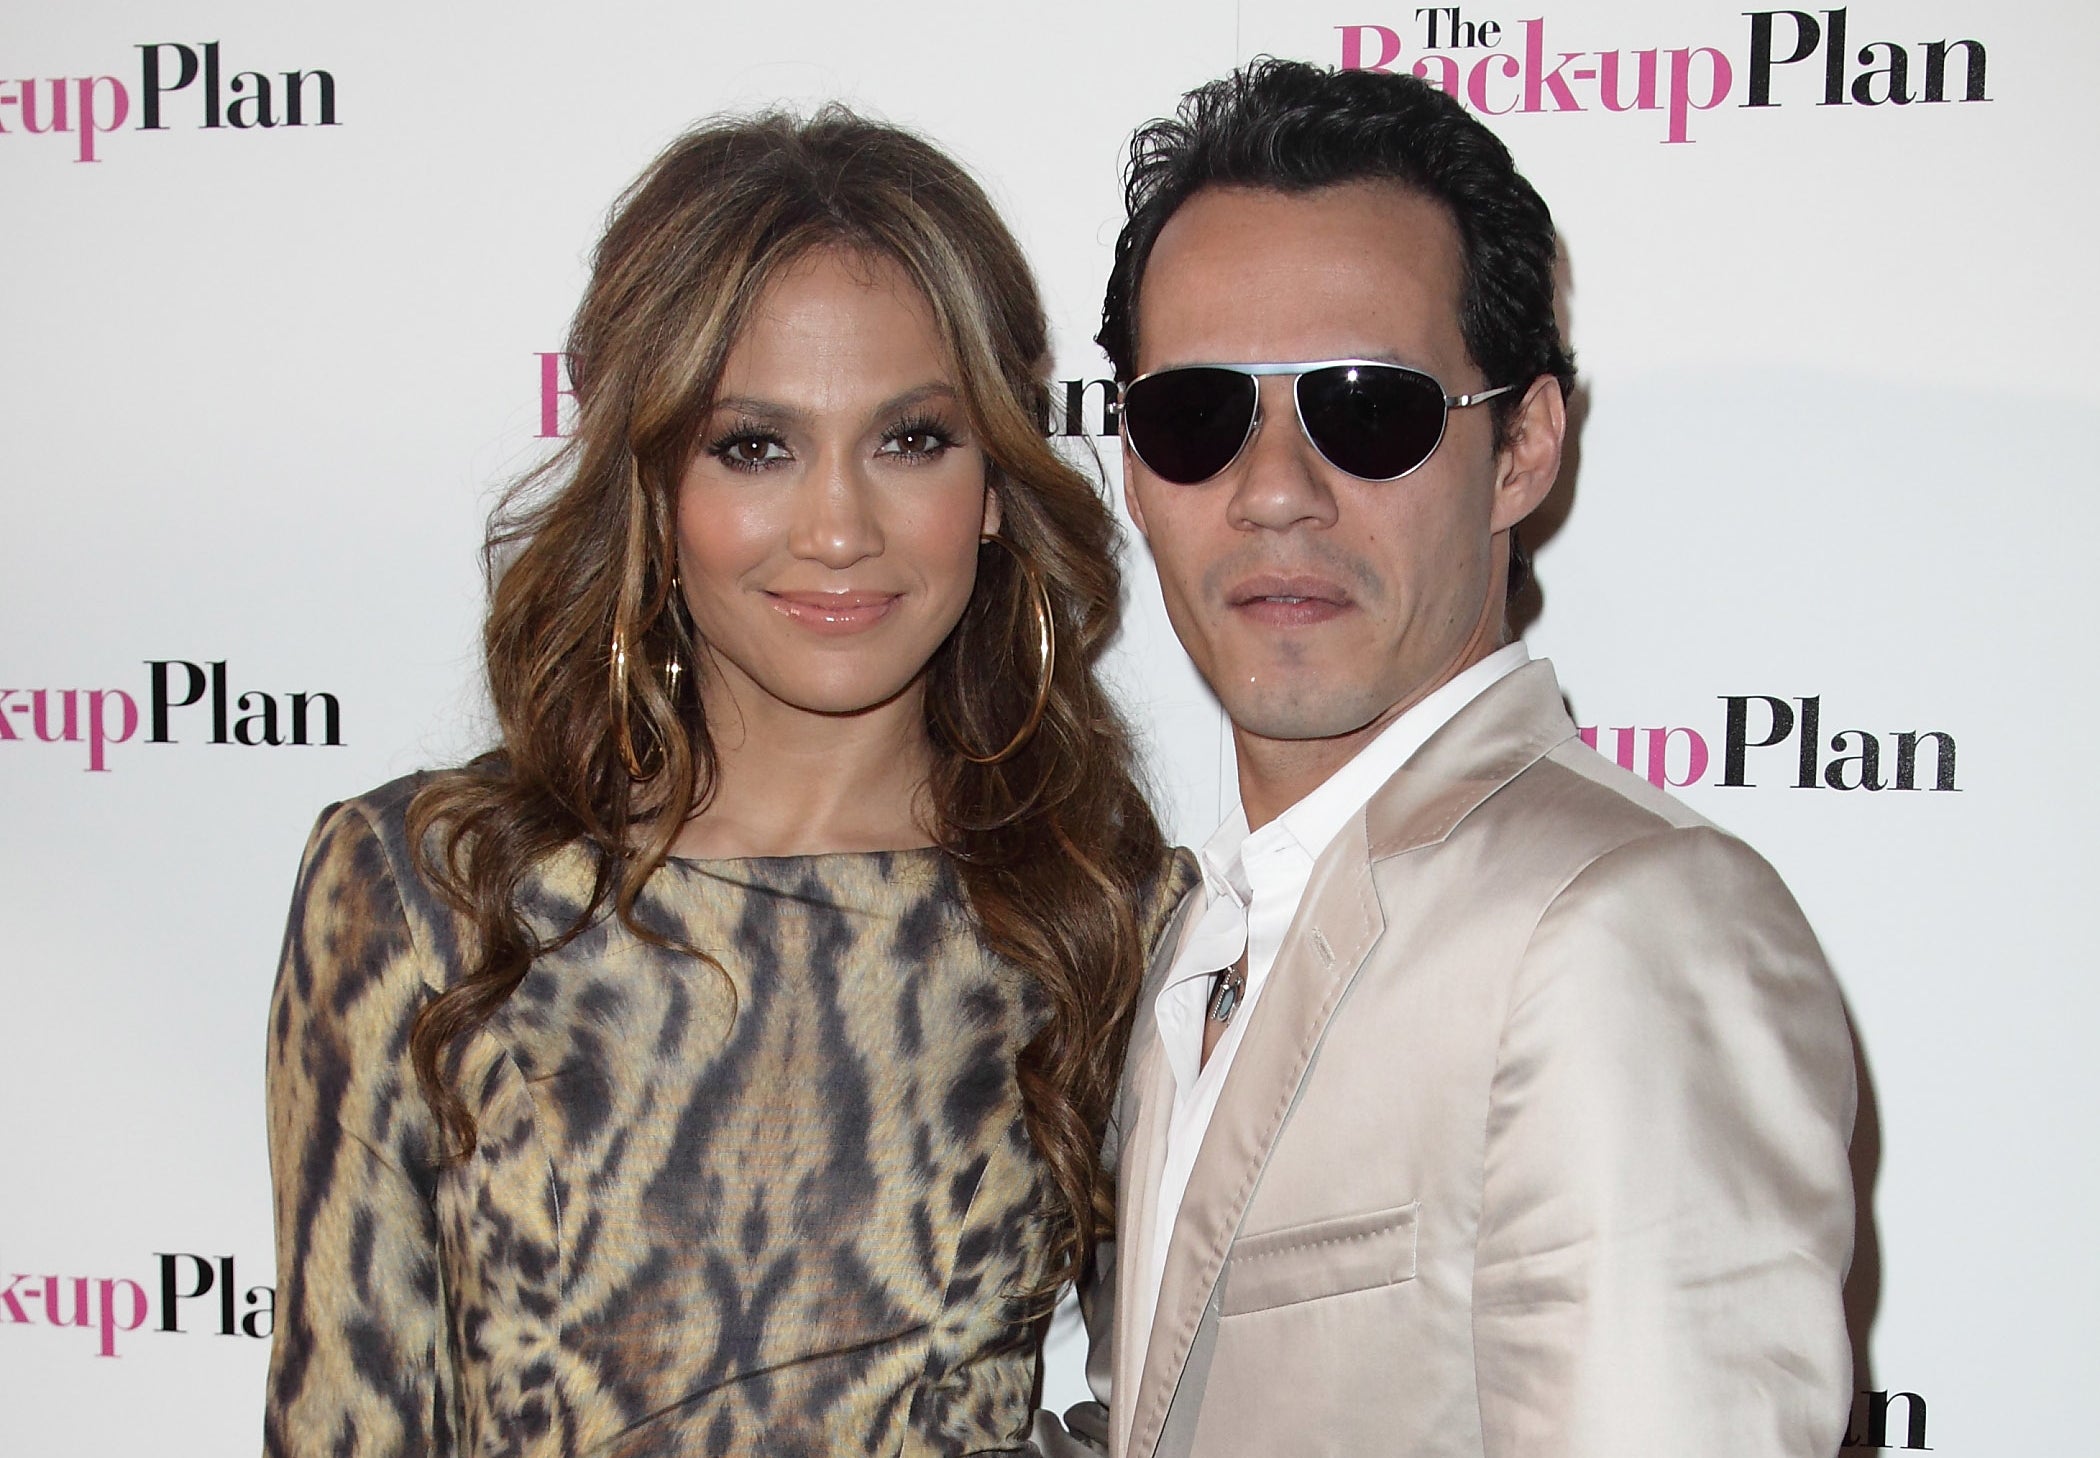 Jennifer Lopez in a leopard print dress and Marc Anthony in a beige suit pose together at an event